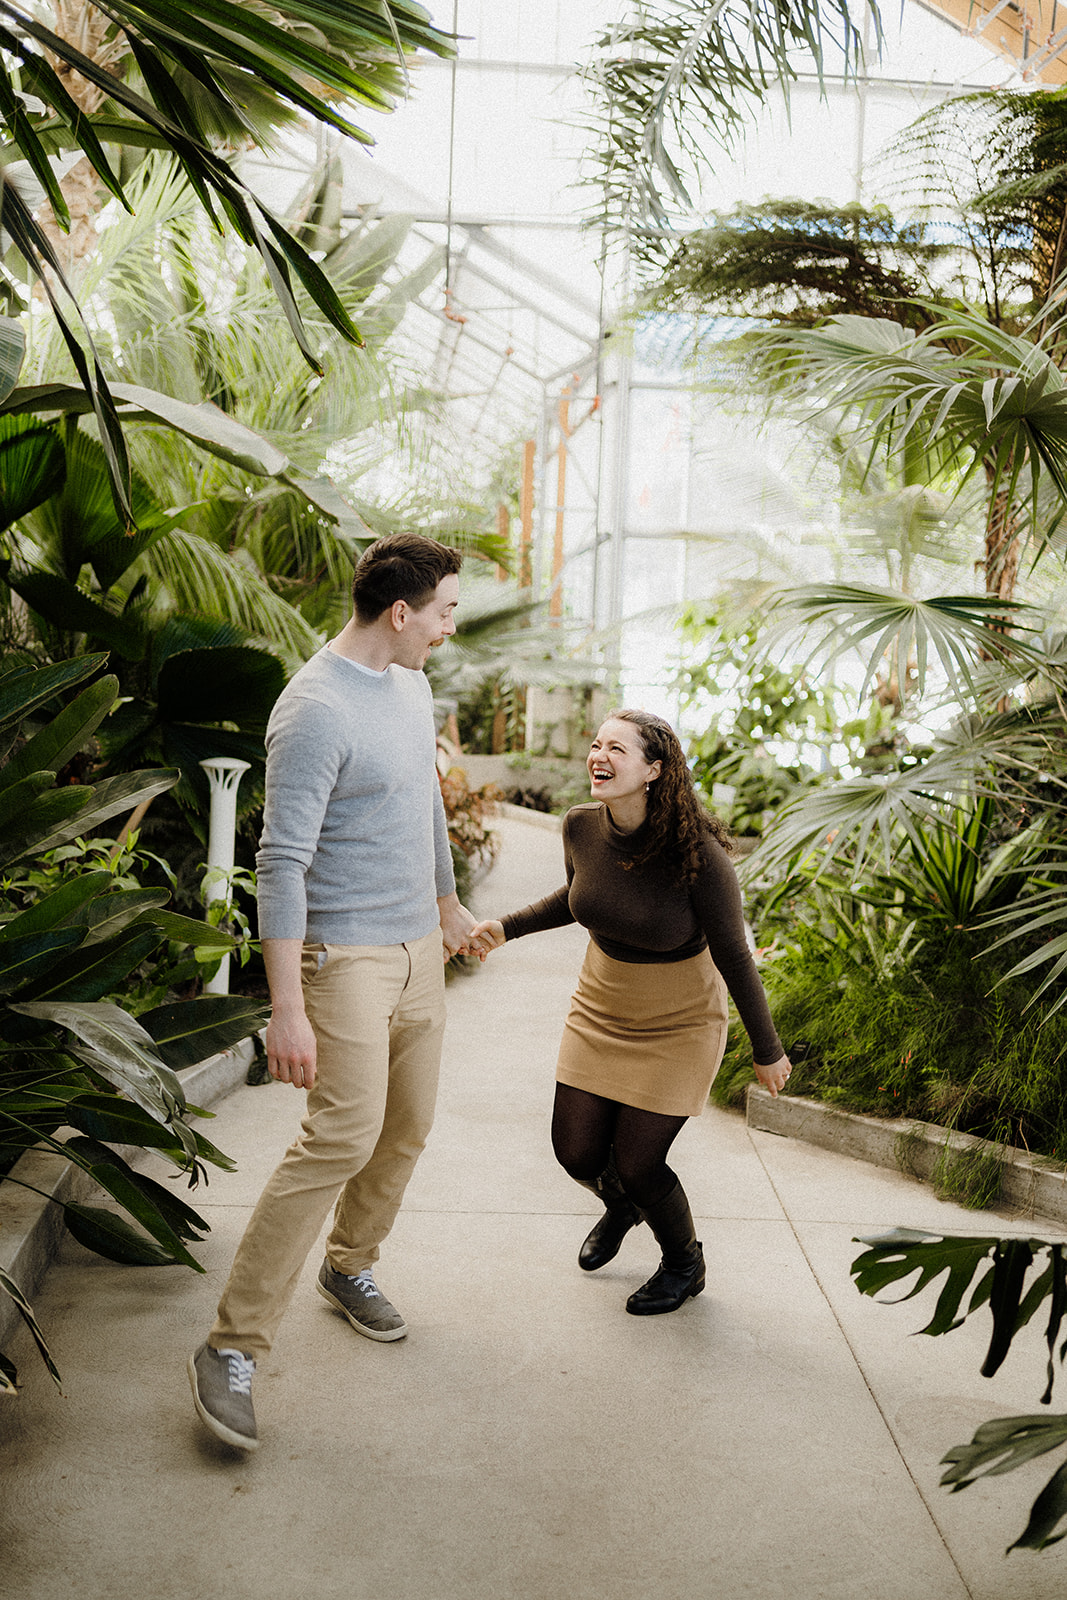 A man and woman walking beside each other in greenhouse.